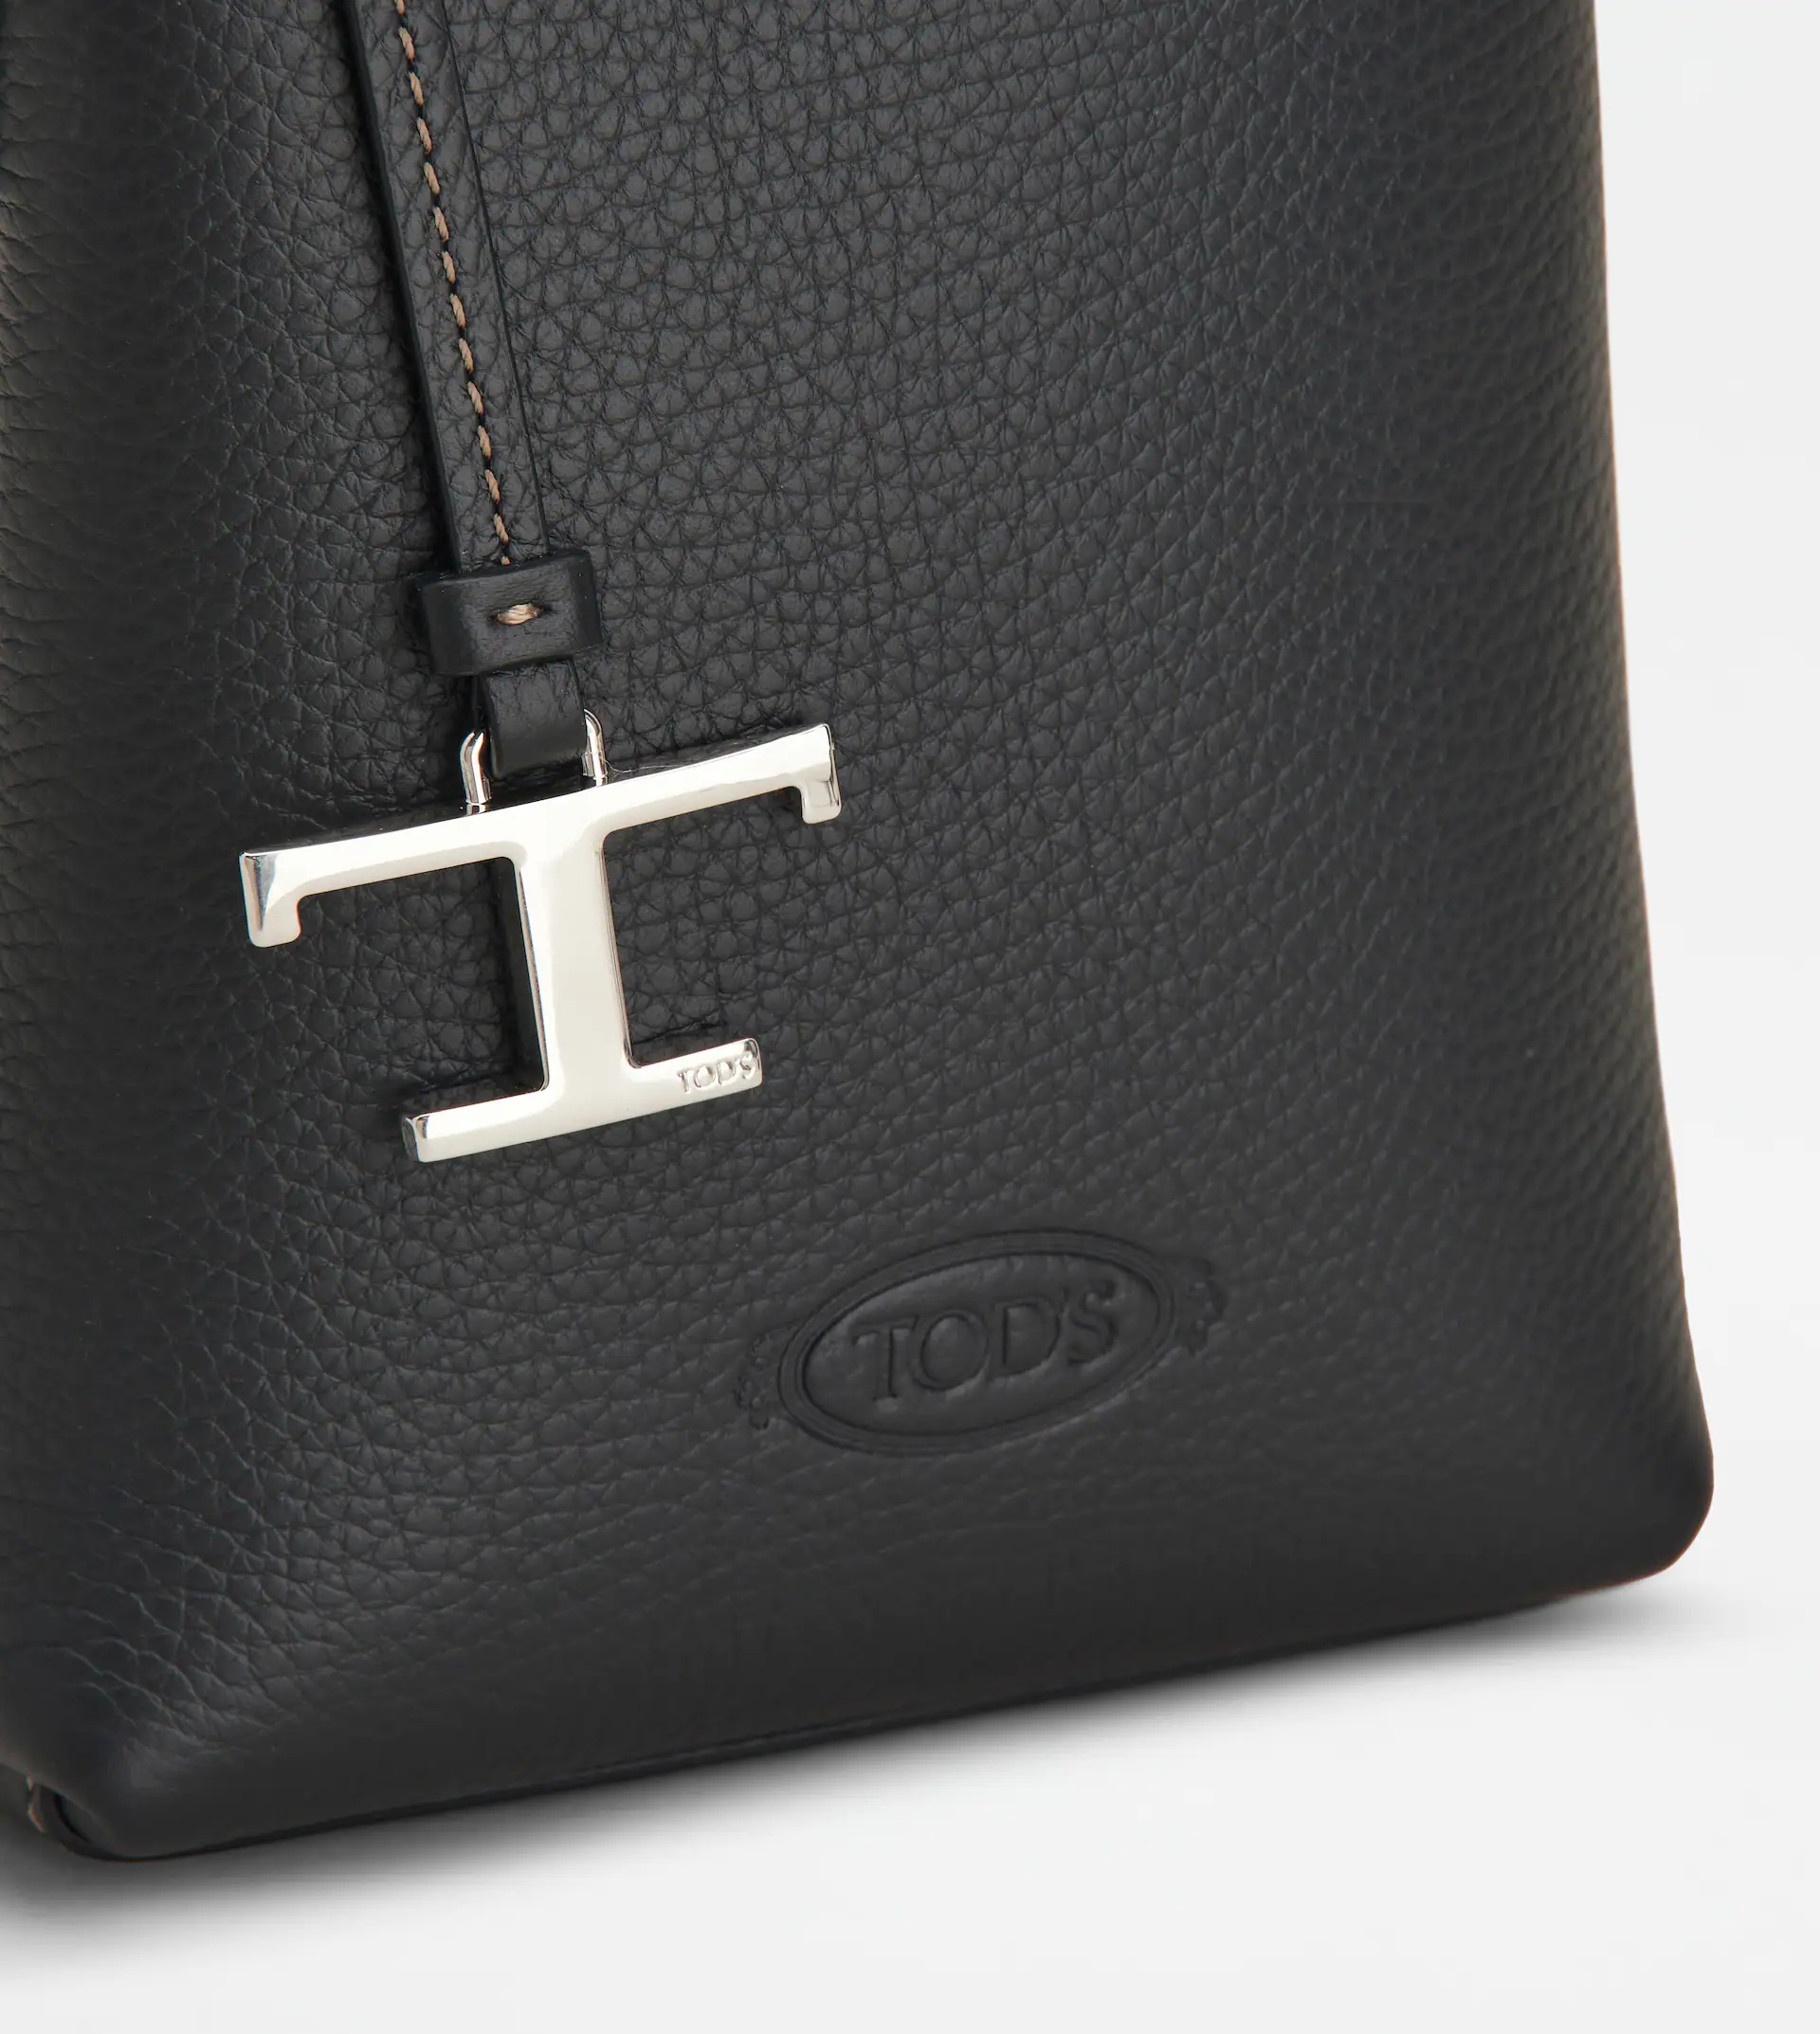 TOD'S MICRO BAG IN LEATHER - BLACK - 4